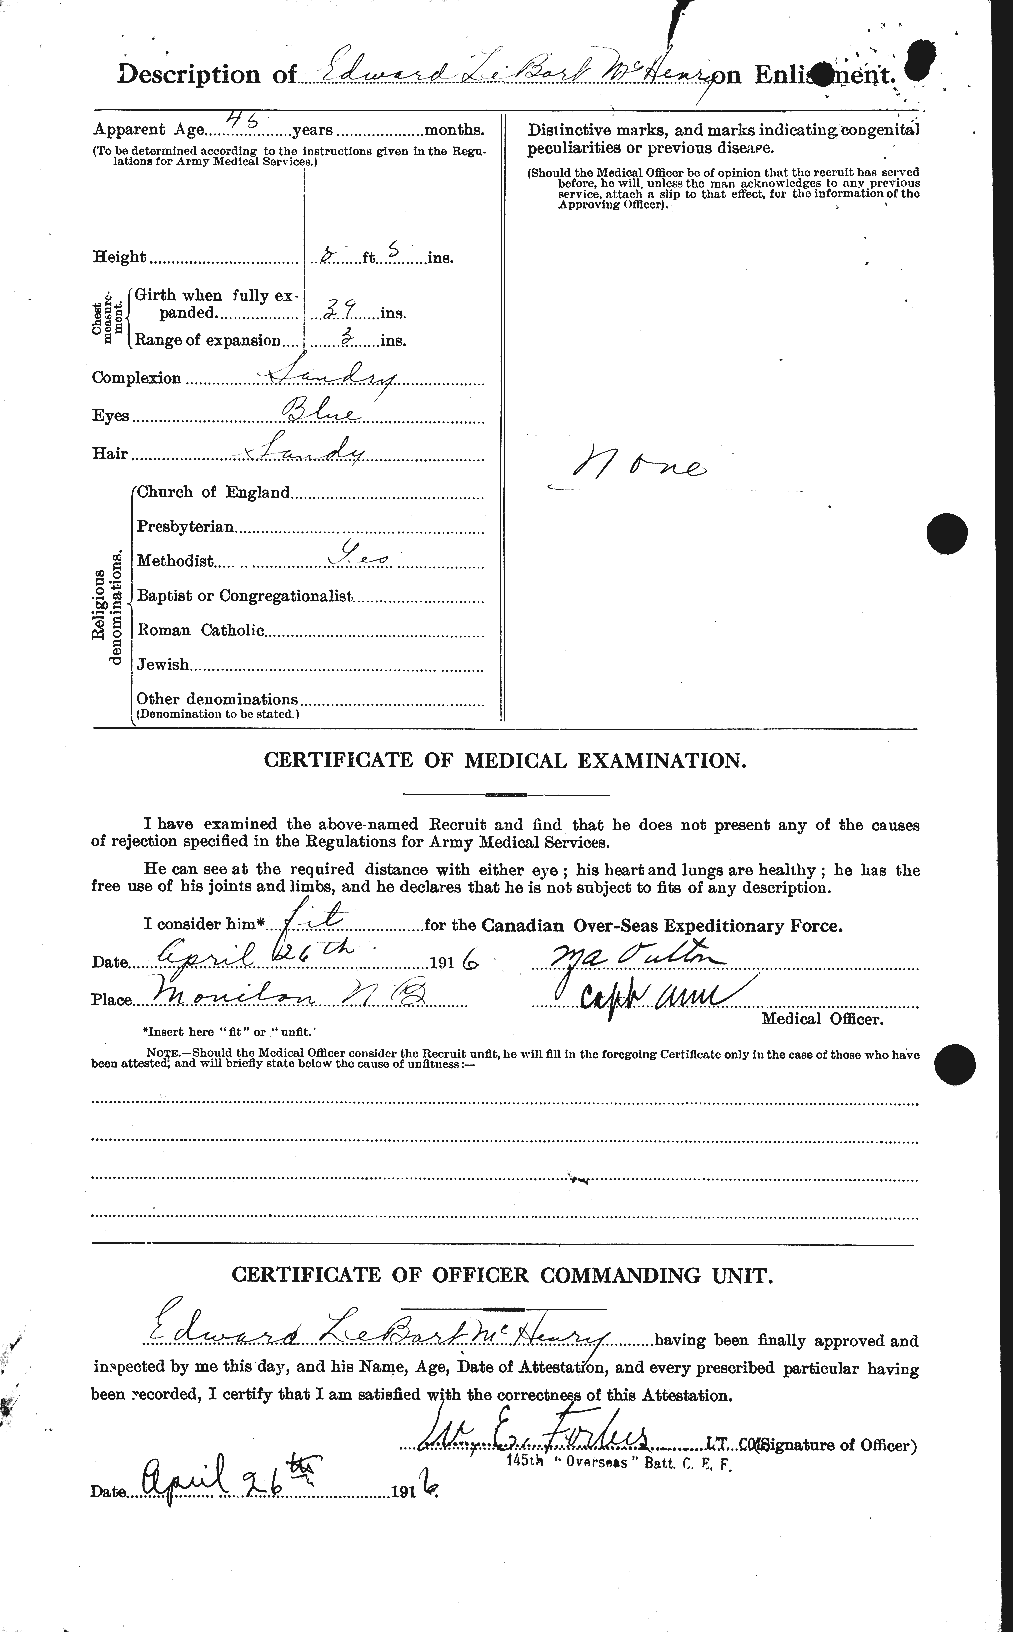 Personnel Records of the First World War - CEF 524283b